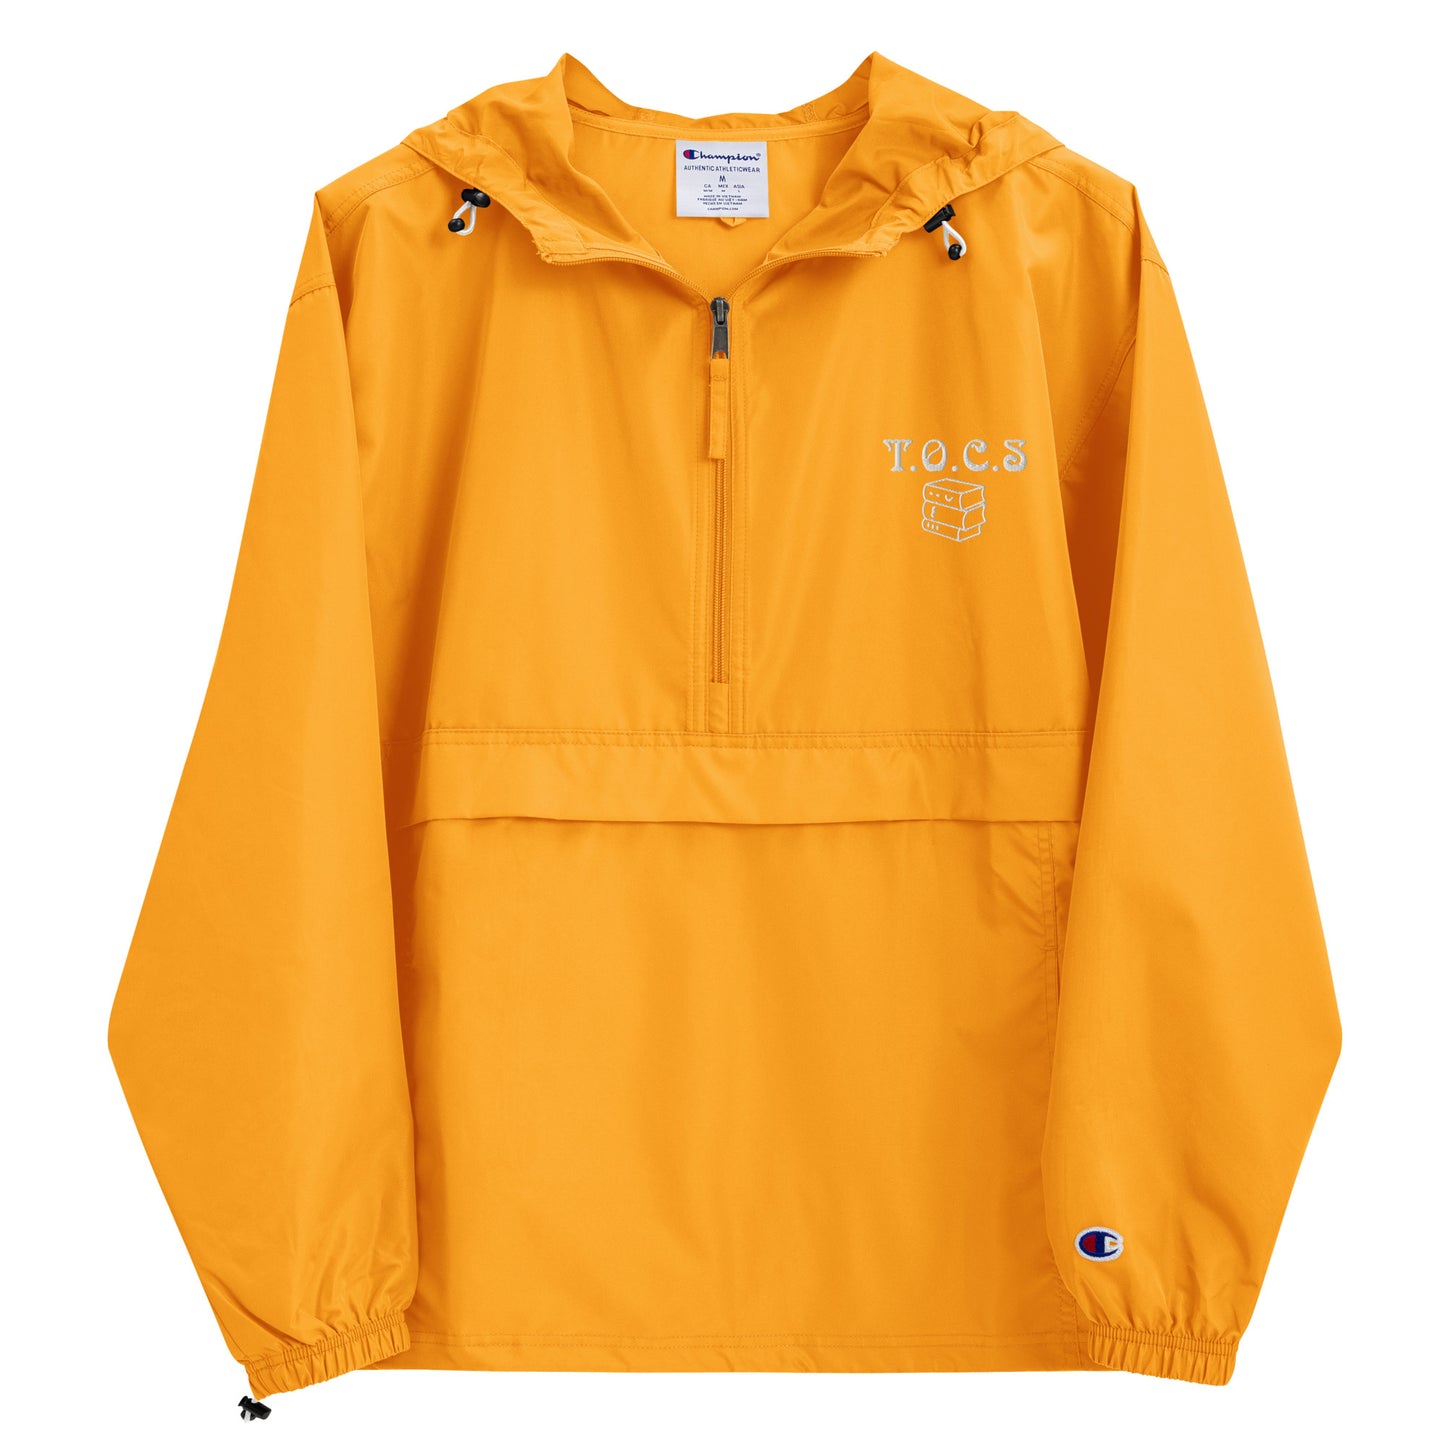 T.O.C.S. Embroidered Champion Packable Jacket